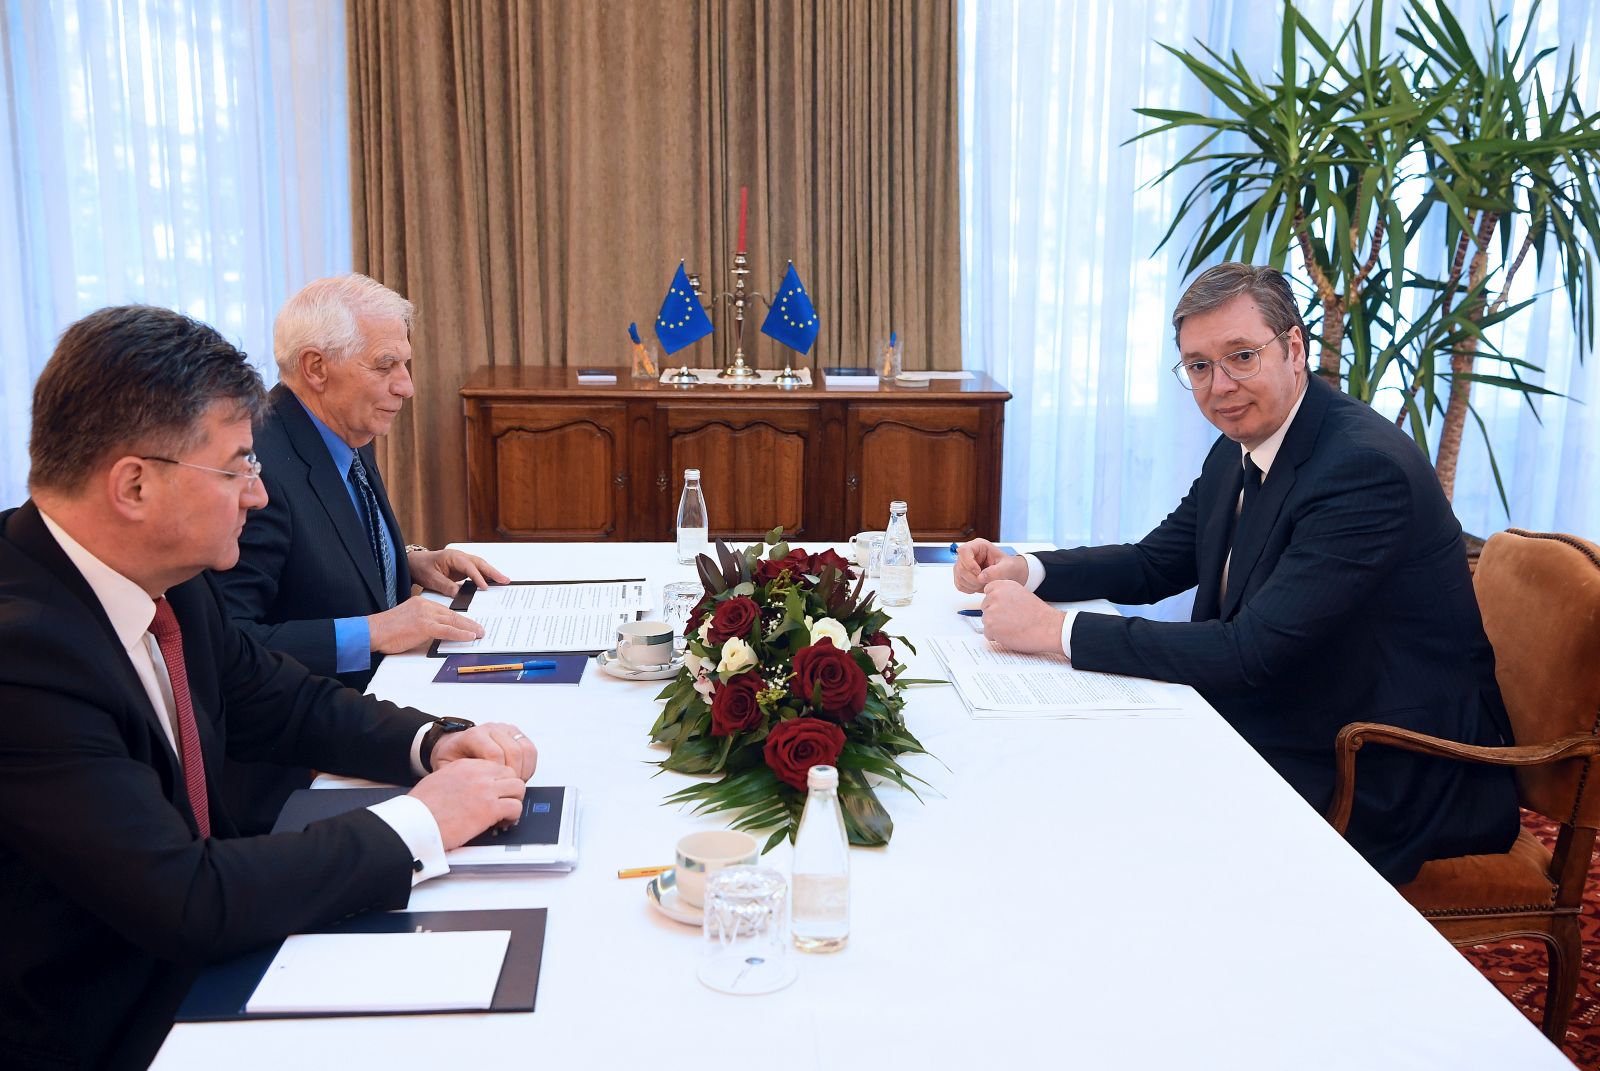 epa10530472 EU High Representative for Foreign Affairs and Security Policy Josep Borrell (C) and EU Special Representative Miroslav Lajcak (L) meet with Serbian President Aleksandar Vucic (R), during the High-level Meeting of the Belgrade-Pristina Dialogue in Ohrid, Republic of North Macedonia, 18 March 2023. International diplomats are trying to make progress with the so-called 'French - German' plan in an effort to normalize the ties between Kosovo and Serbia.  EPA/DIMITRIJE GOLL